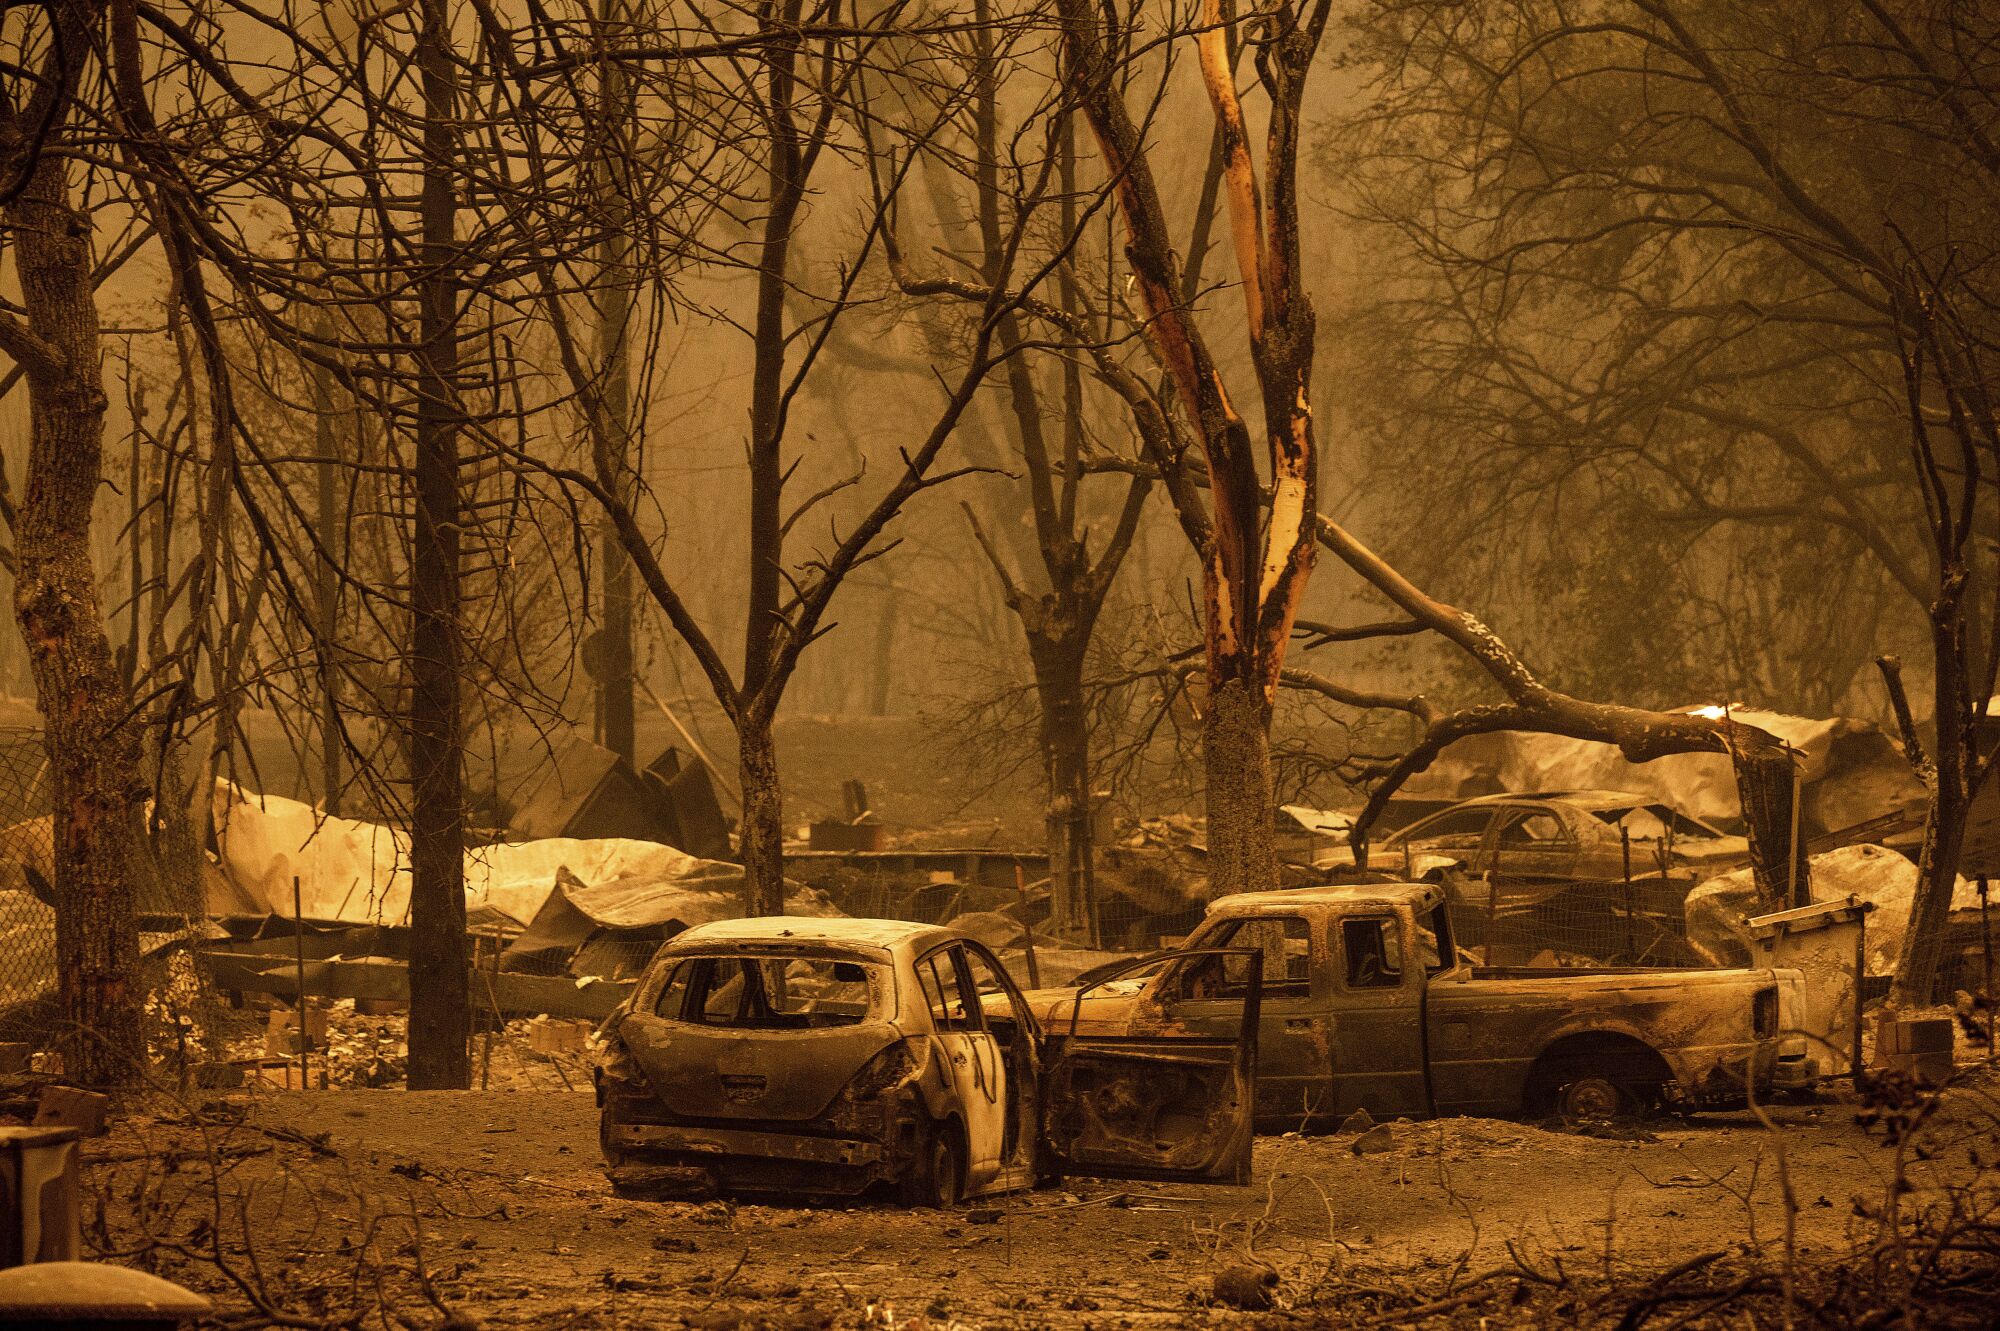 Burned homes, cars and trees in a smoky landscape.